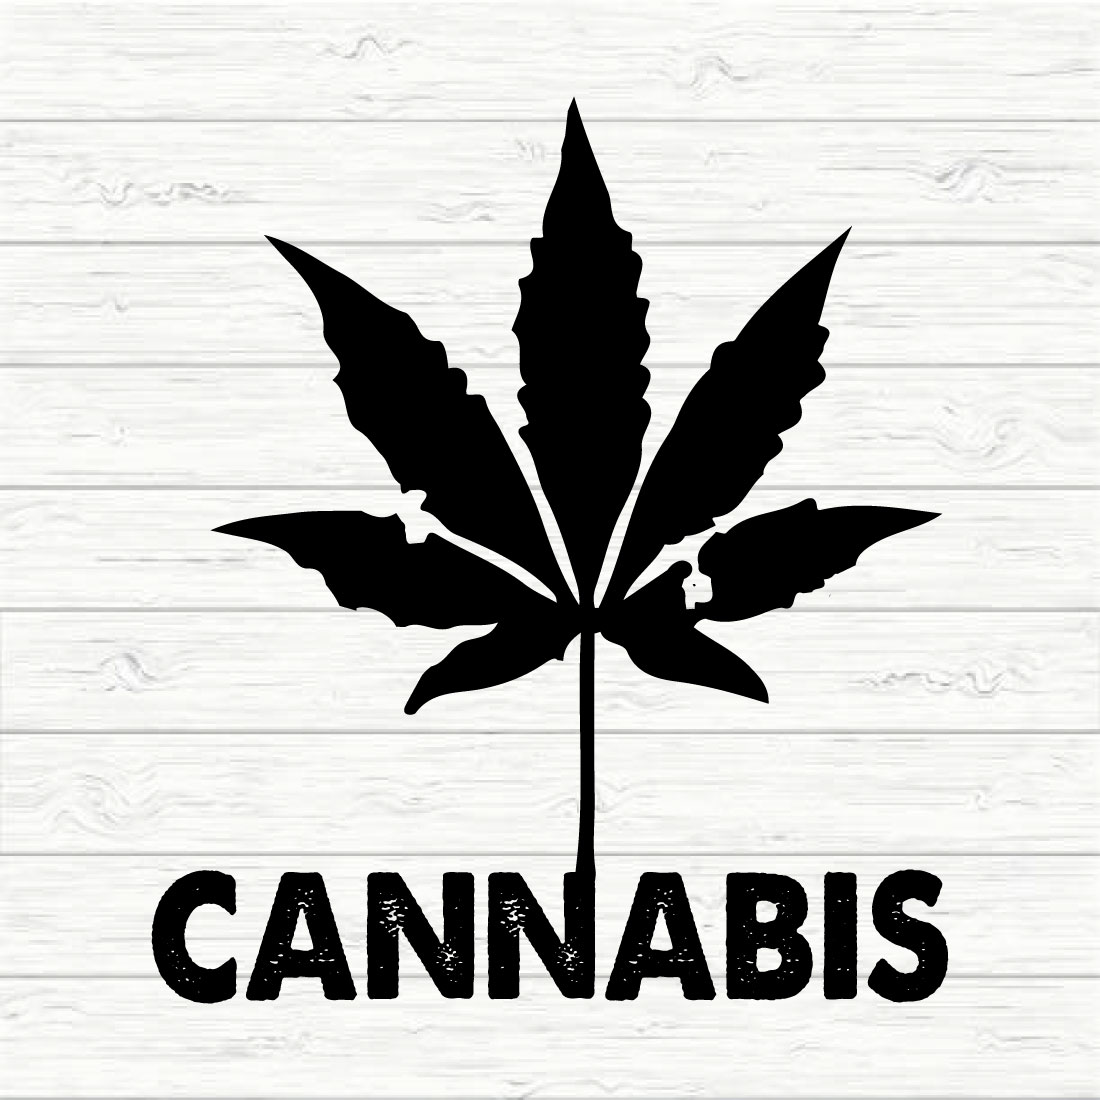 Cannabis preview image.